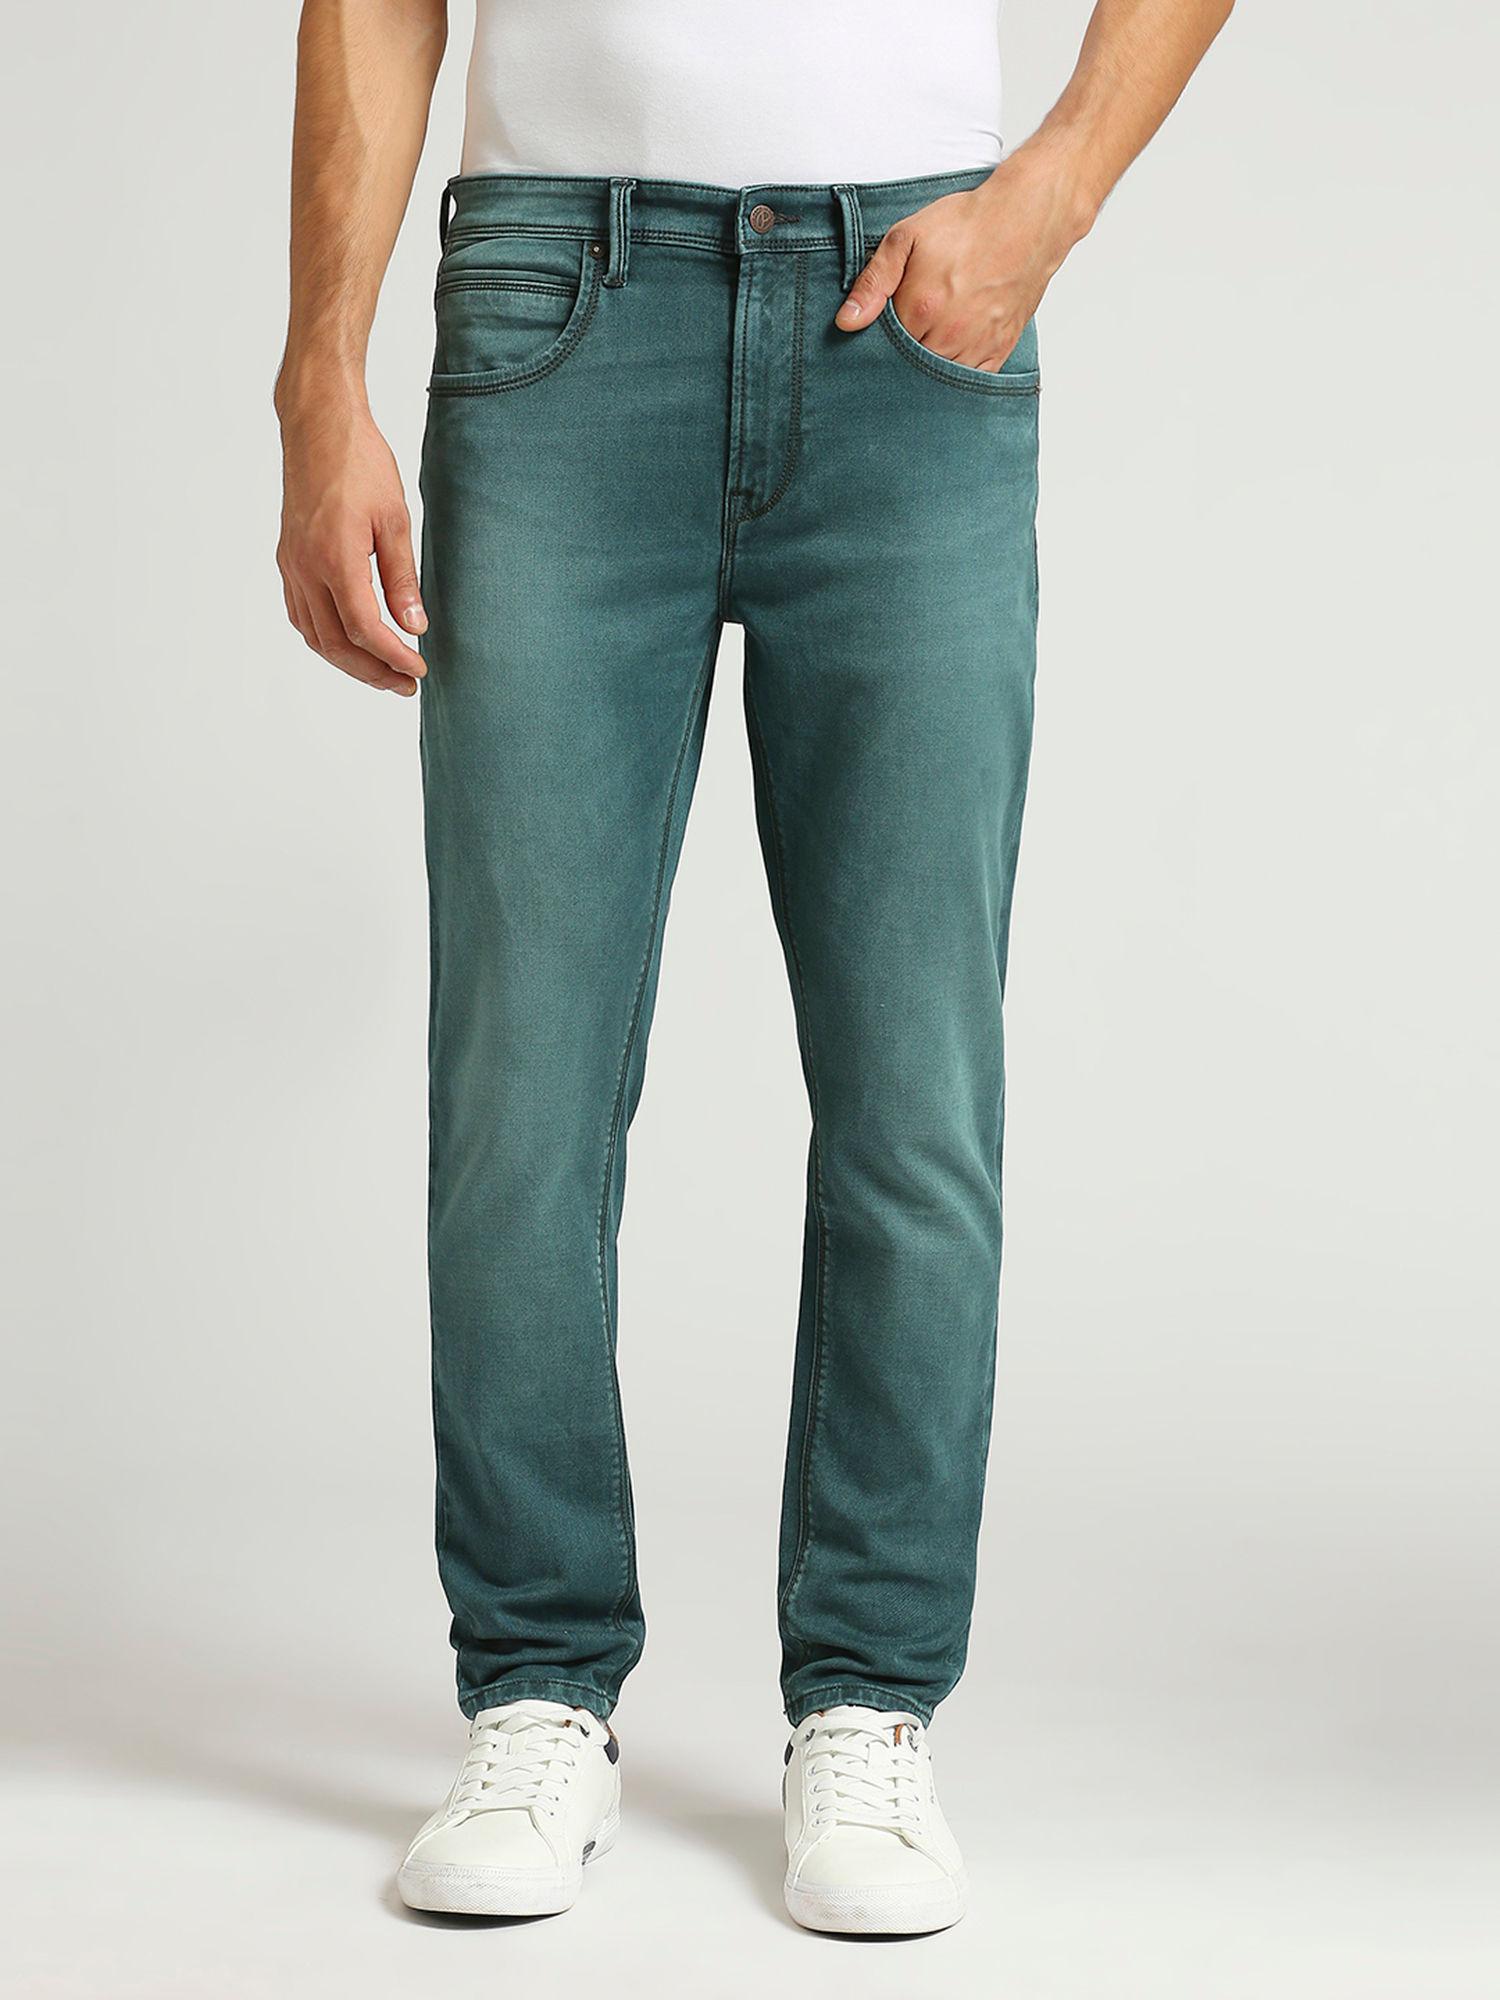 chinox-ankle-super-skinny-fit-mid-waist-ankle-jeans